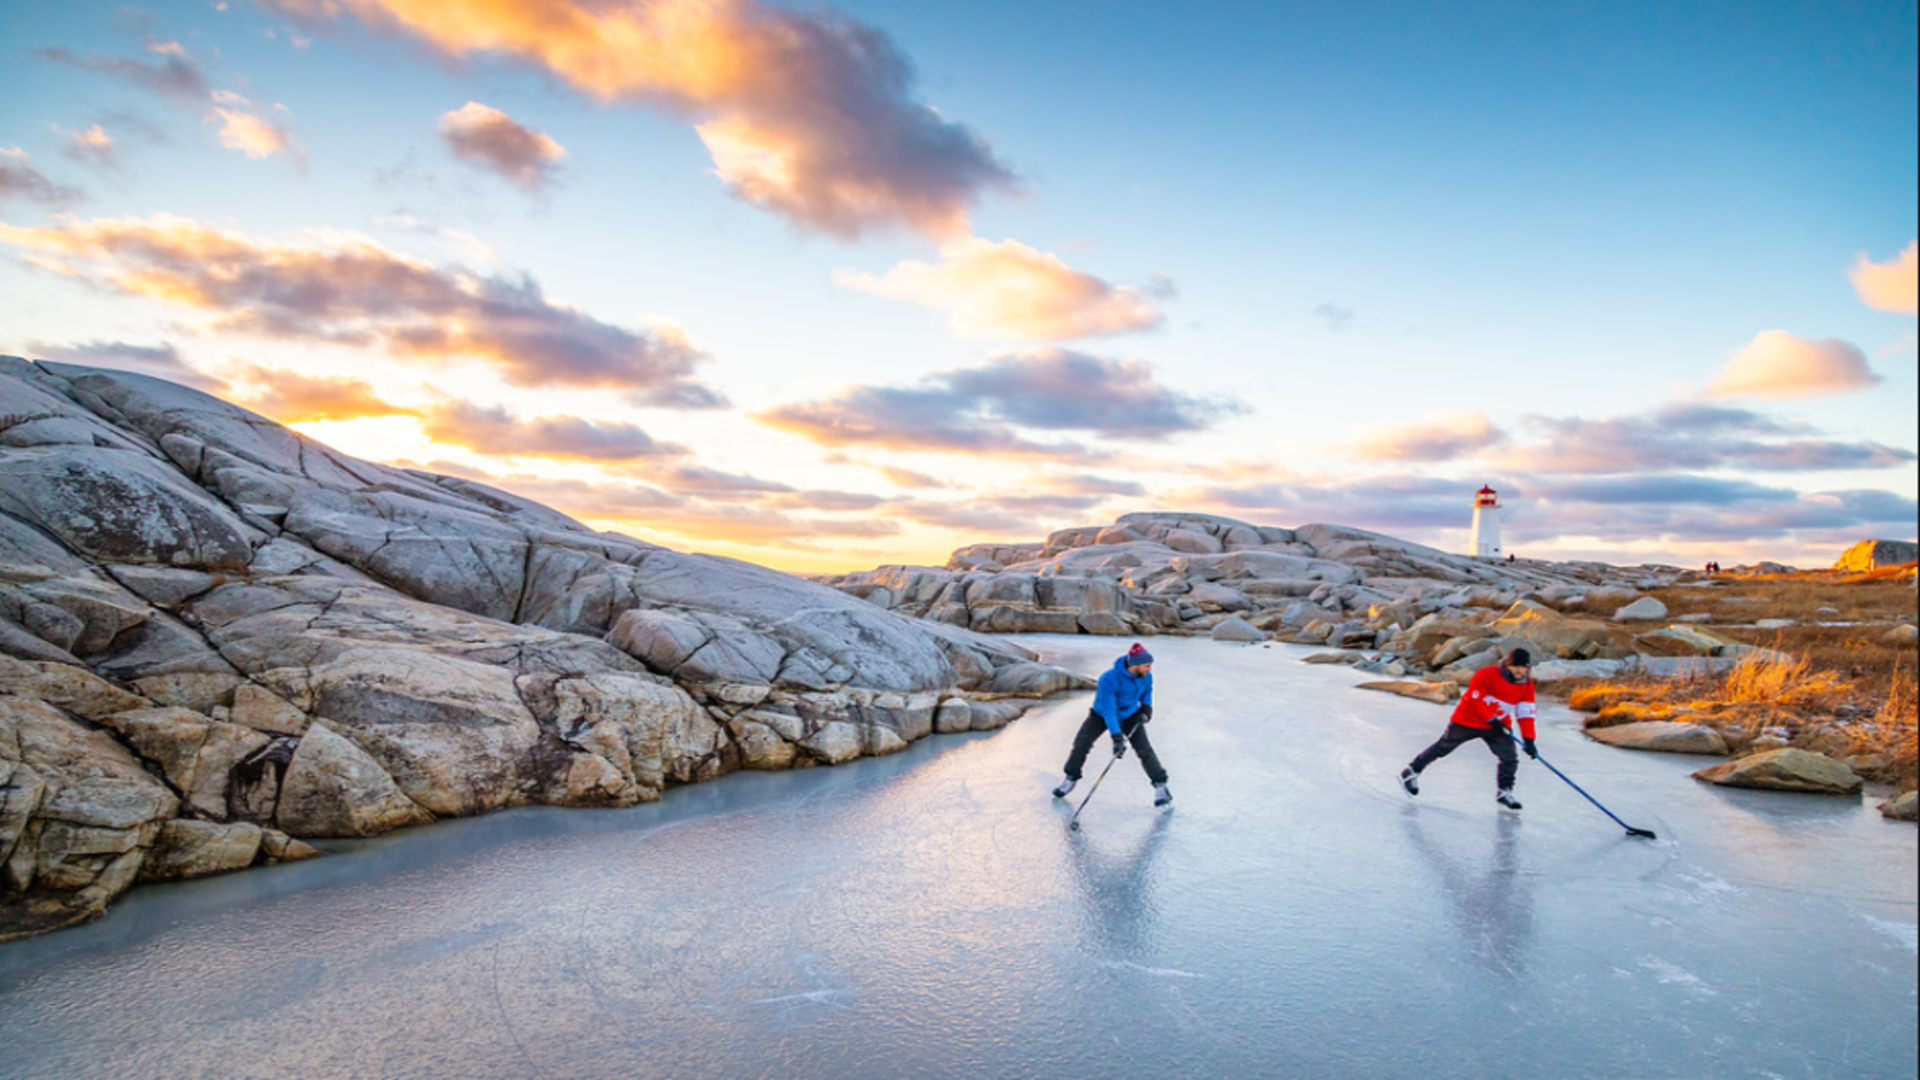 Hockey At Peggy S Cove Lighthouse Wallpaper